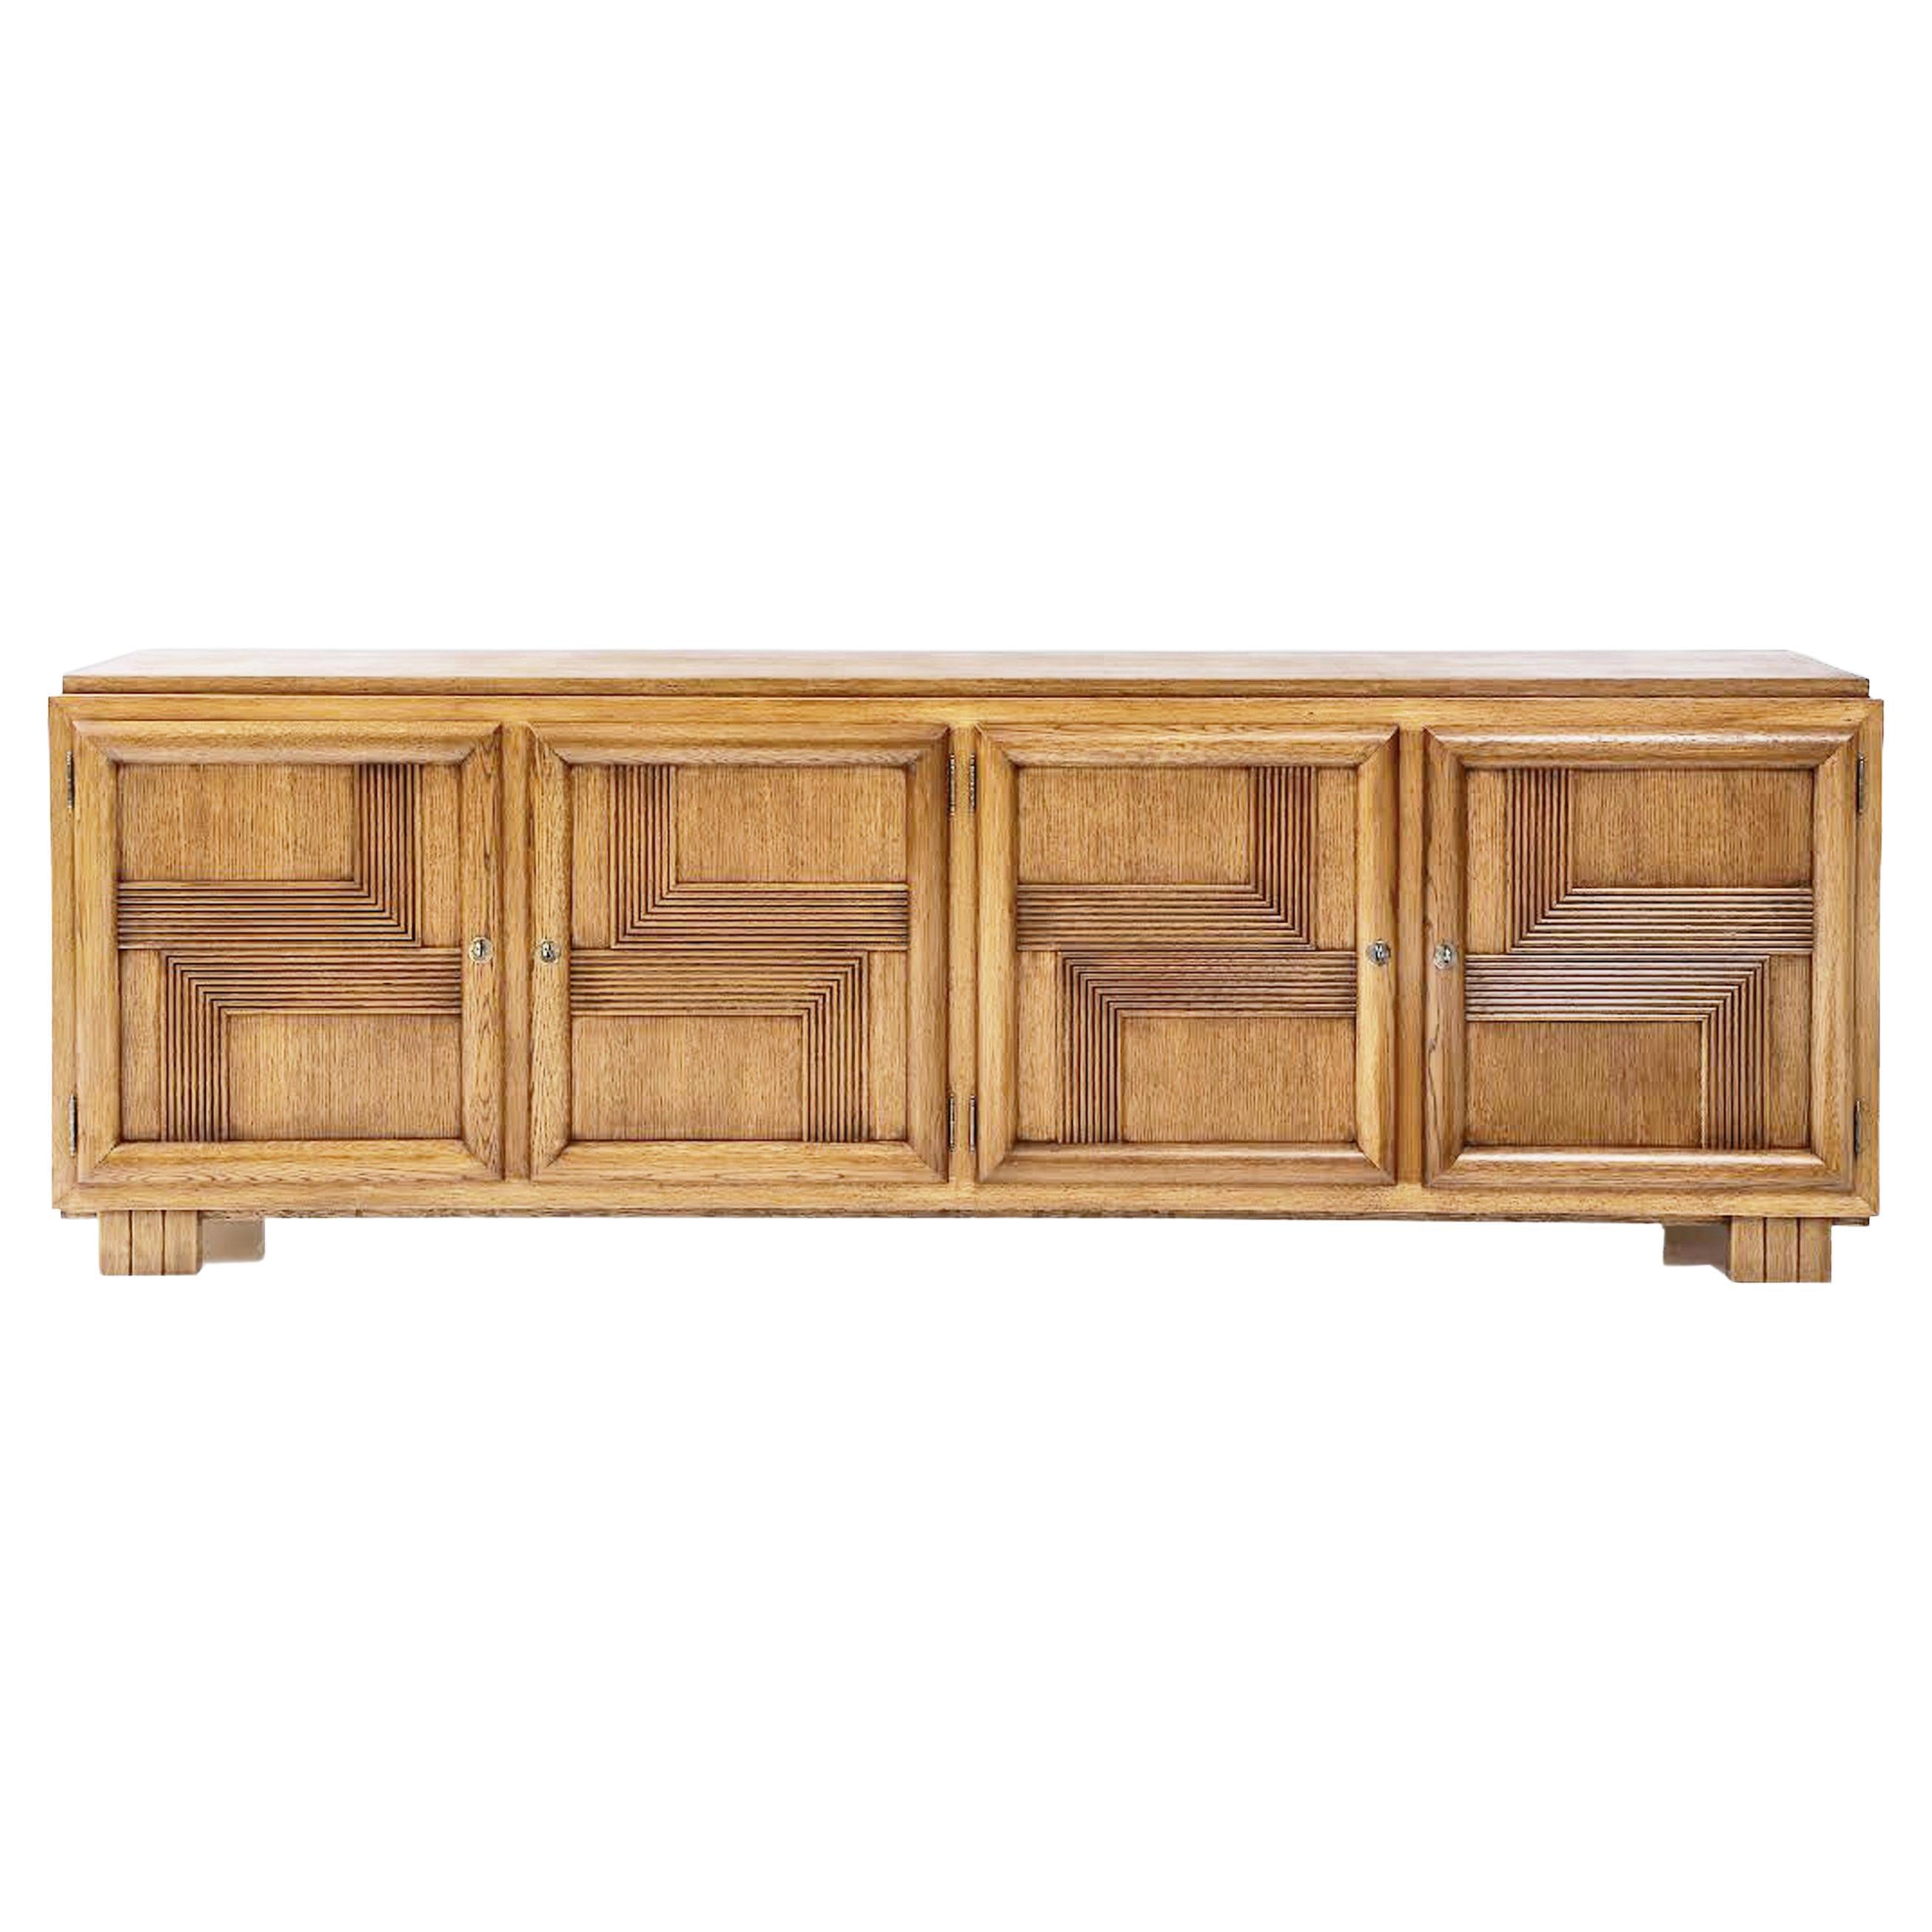 'Fredrik' Made to Order Solid Oak Handcrafted Sideboard